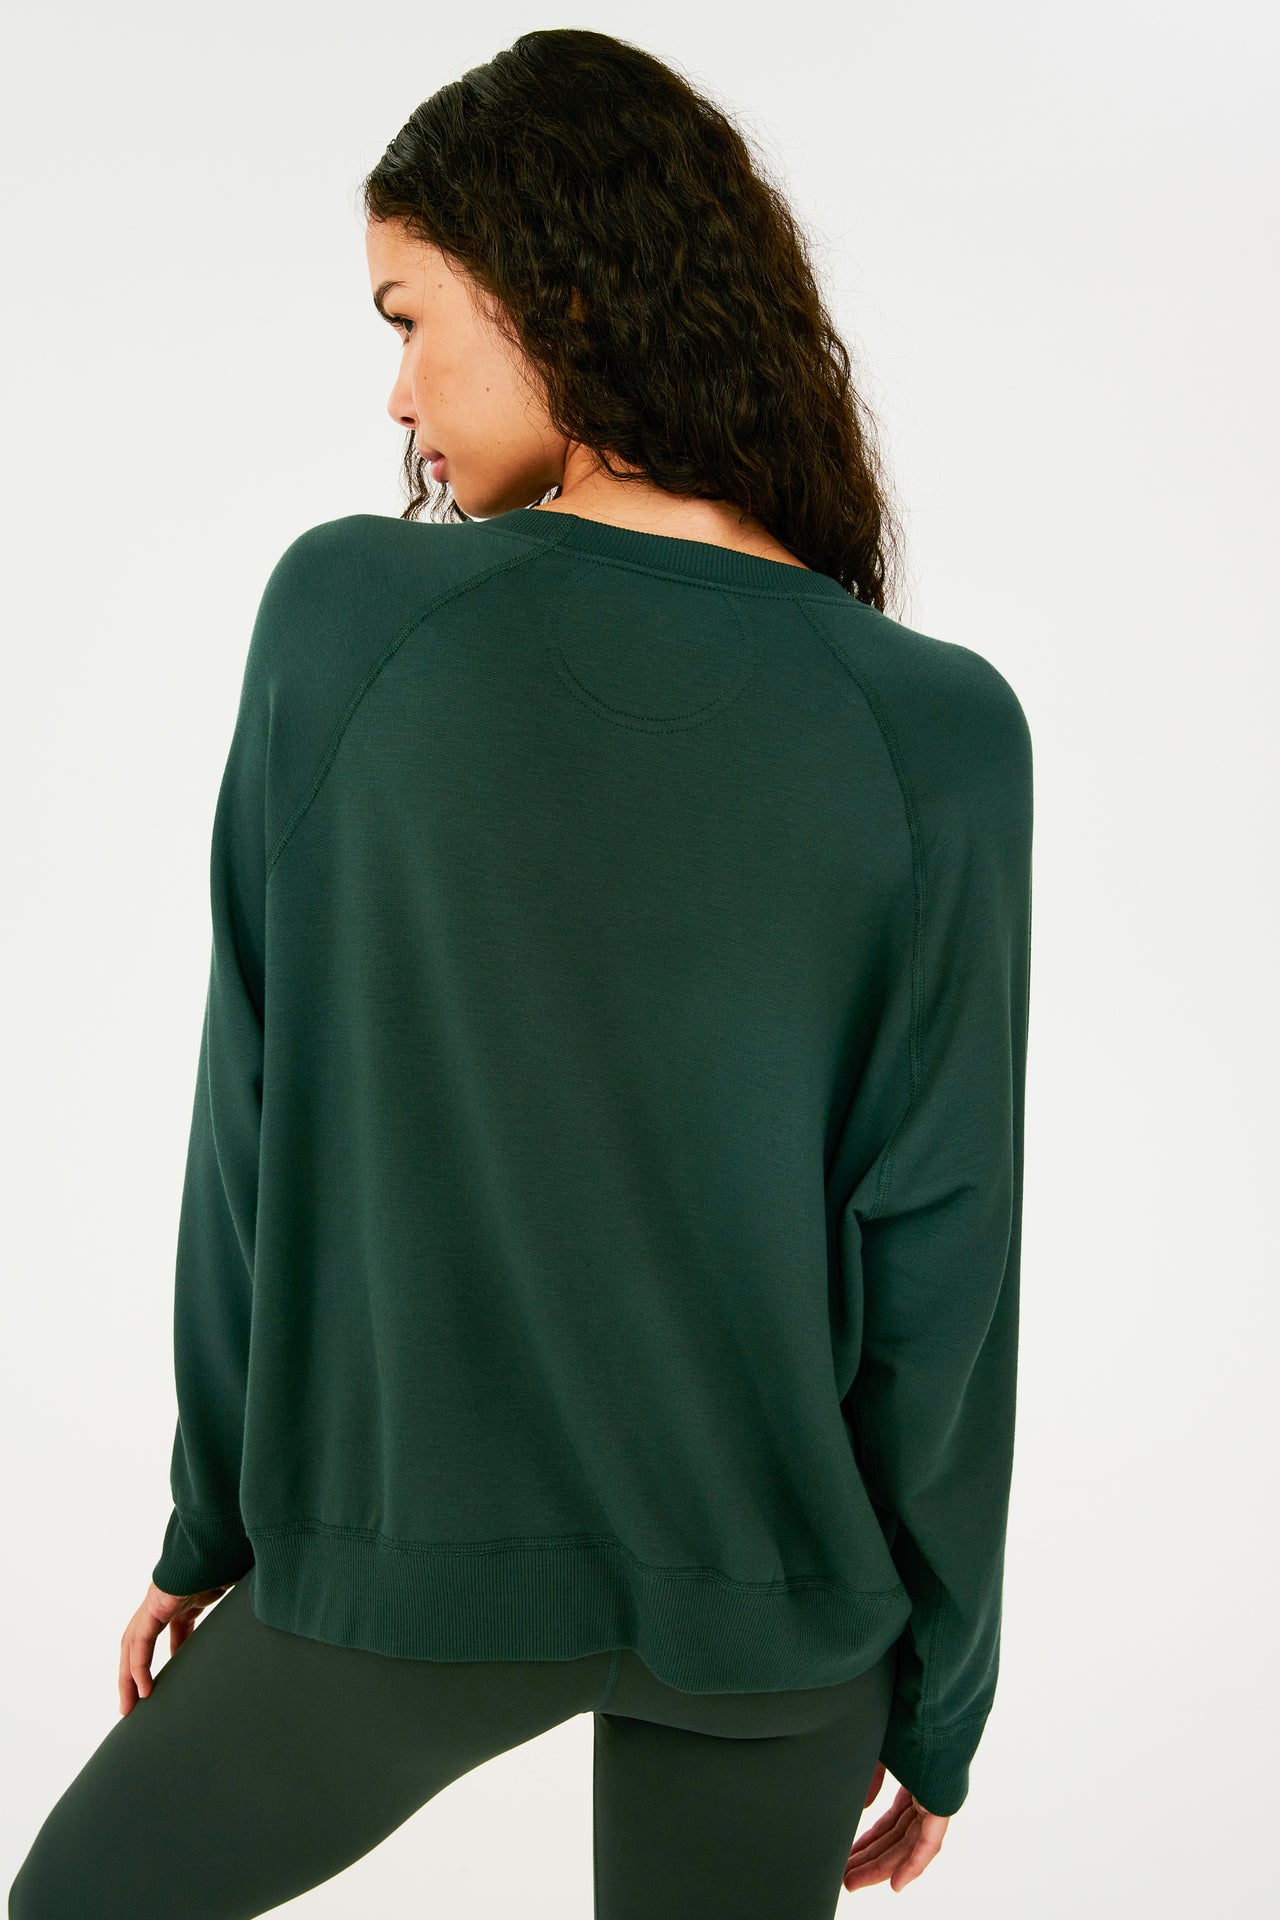 Back view of girl wearing dark green sweatshirt with visible stitching and ribbed hem